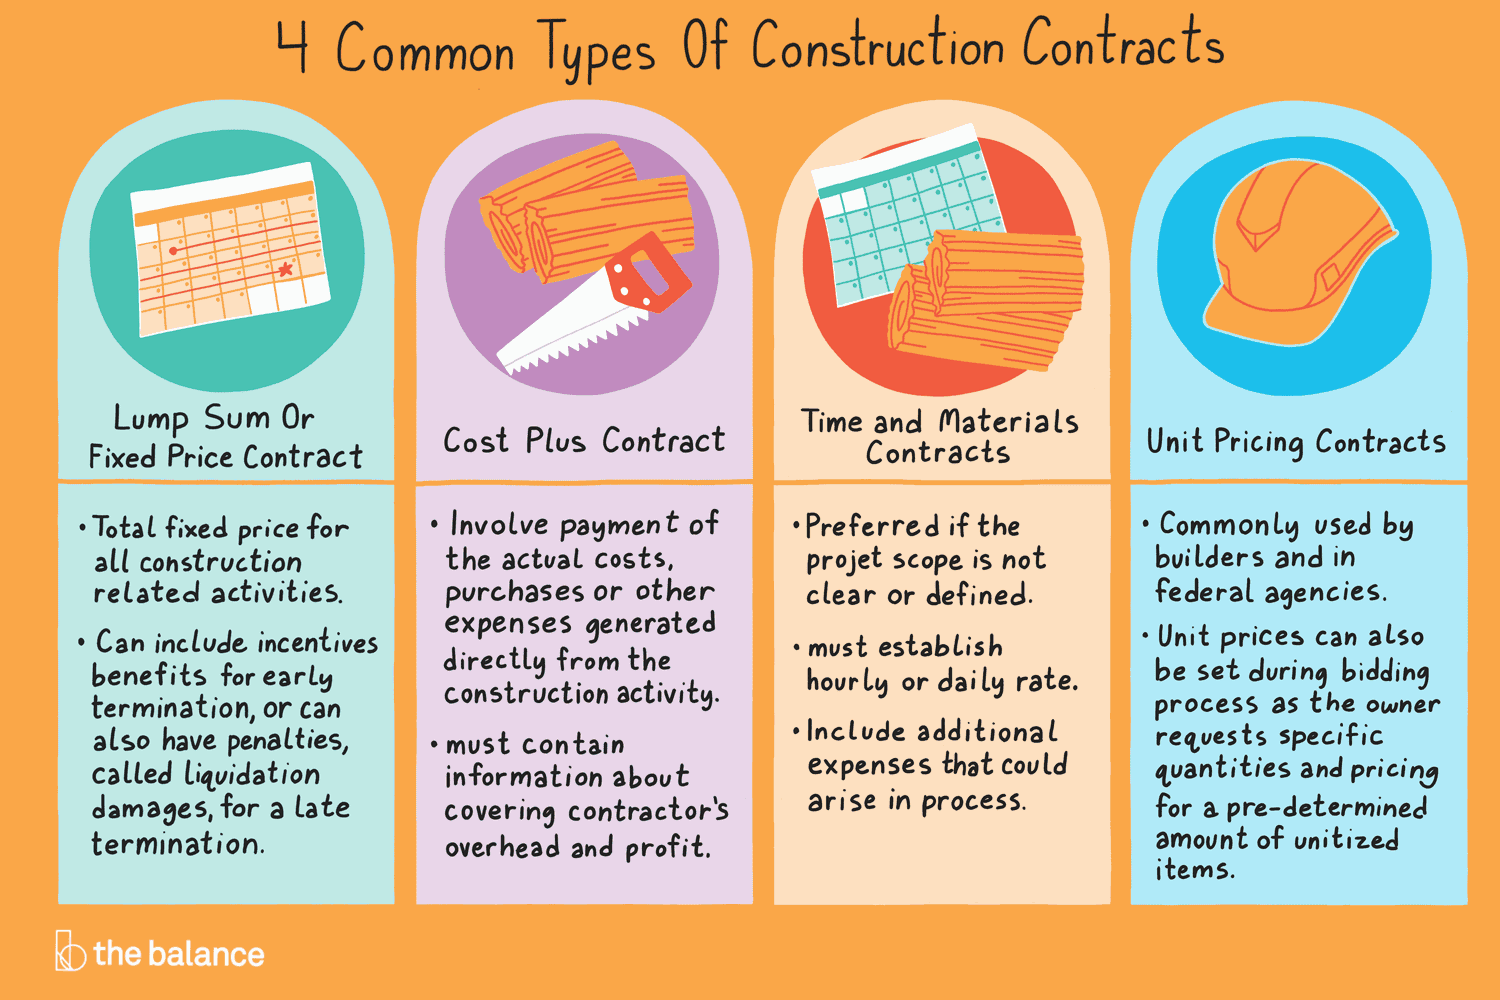 types-of-procurement-contracts-commonly-adopted-in-construction-industries